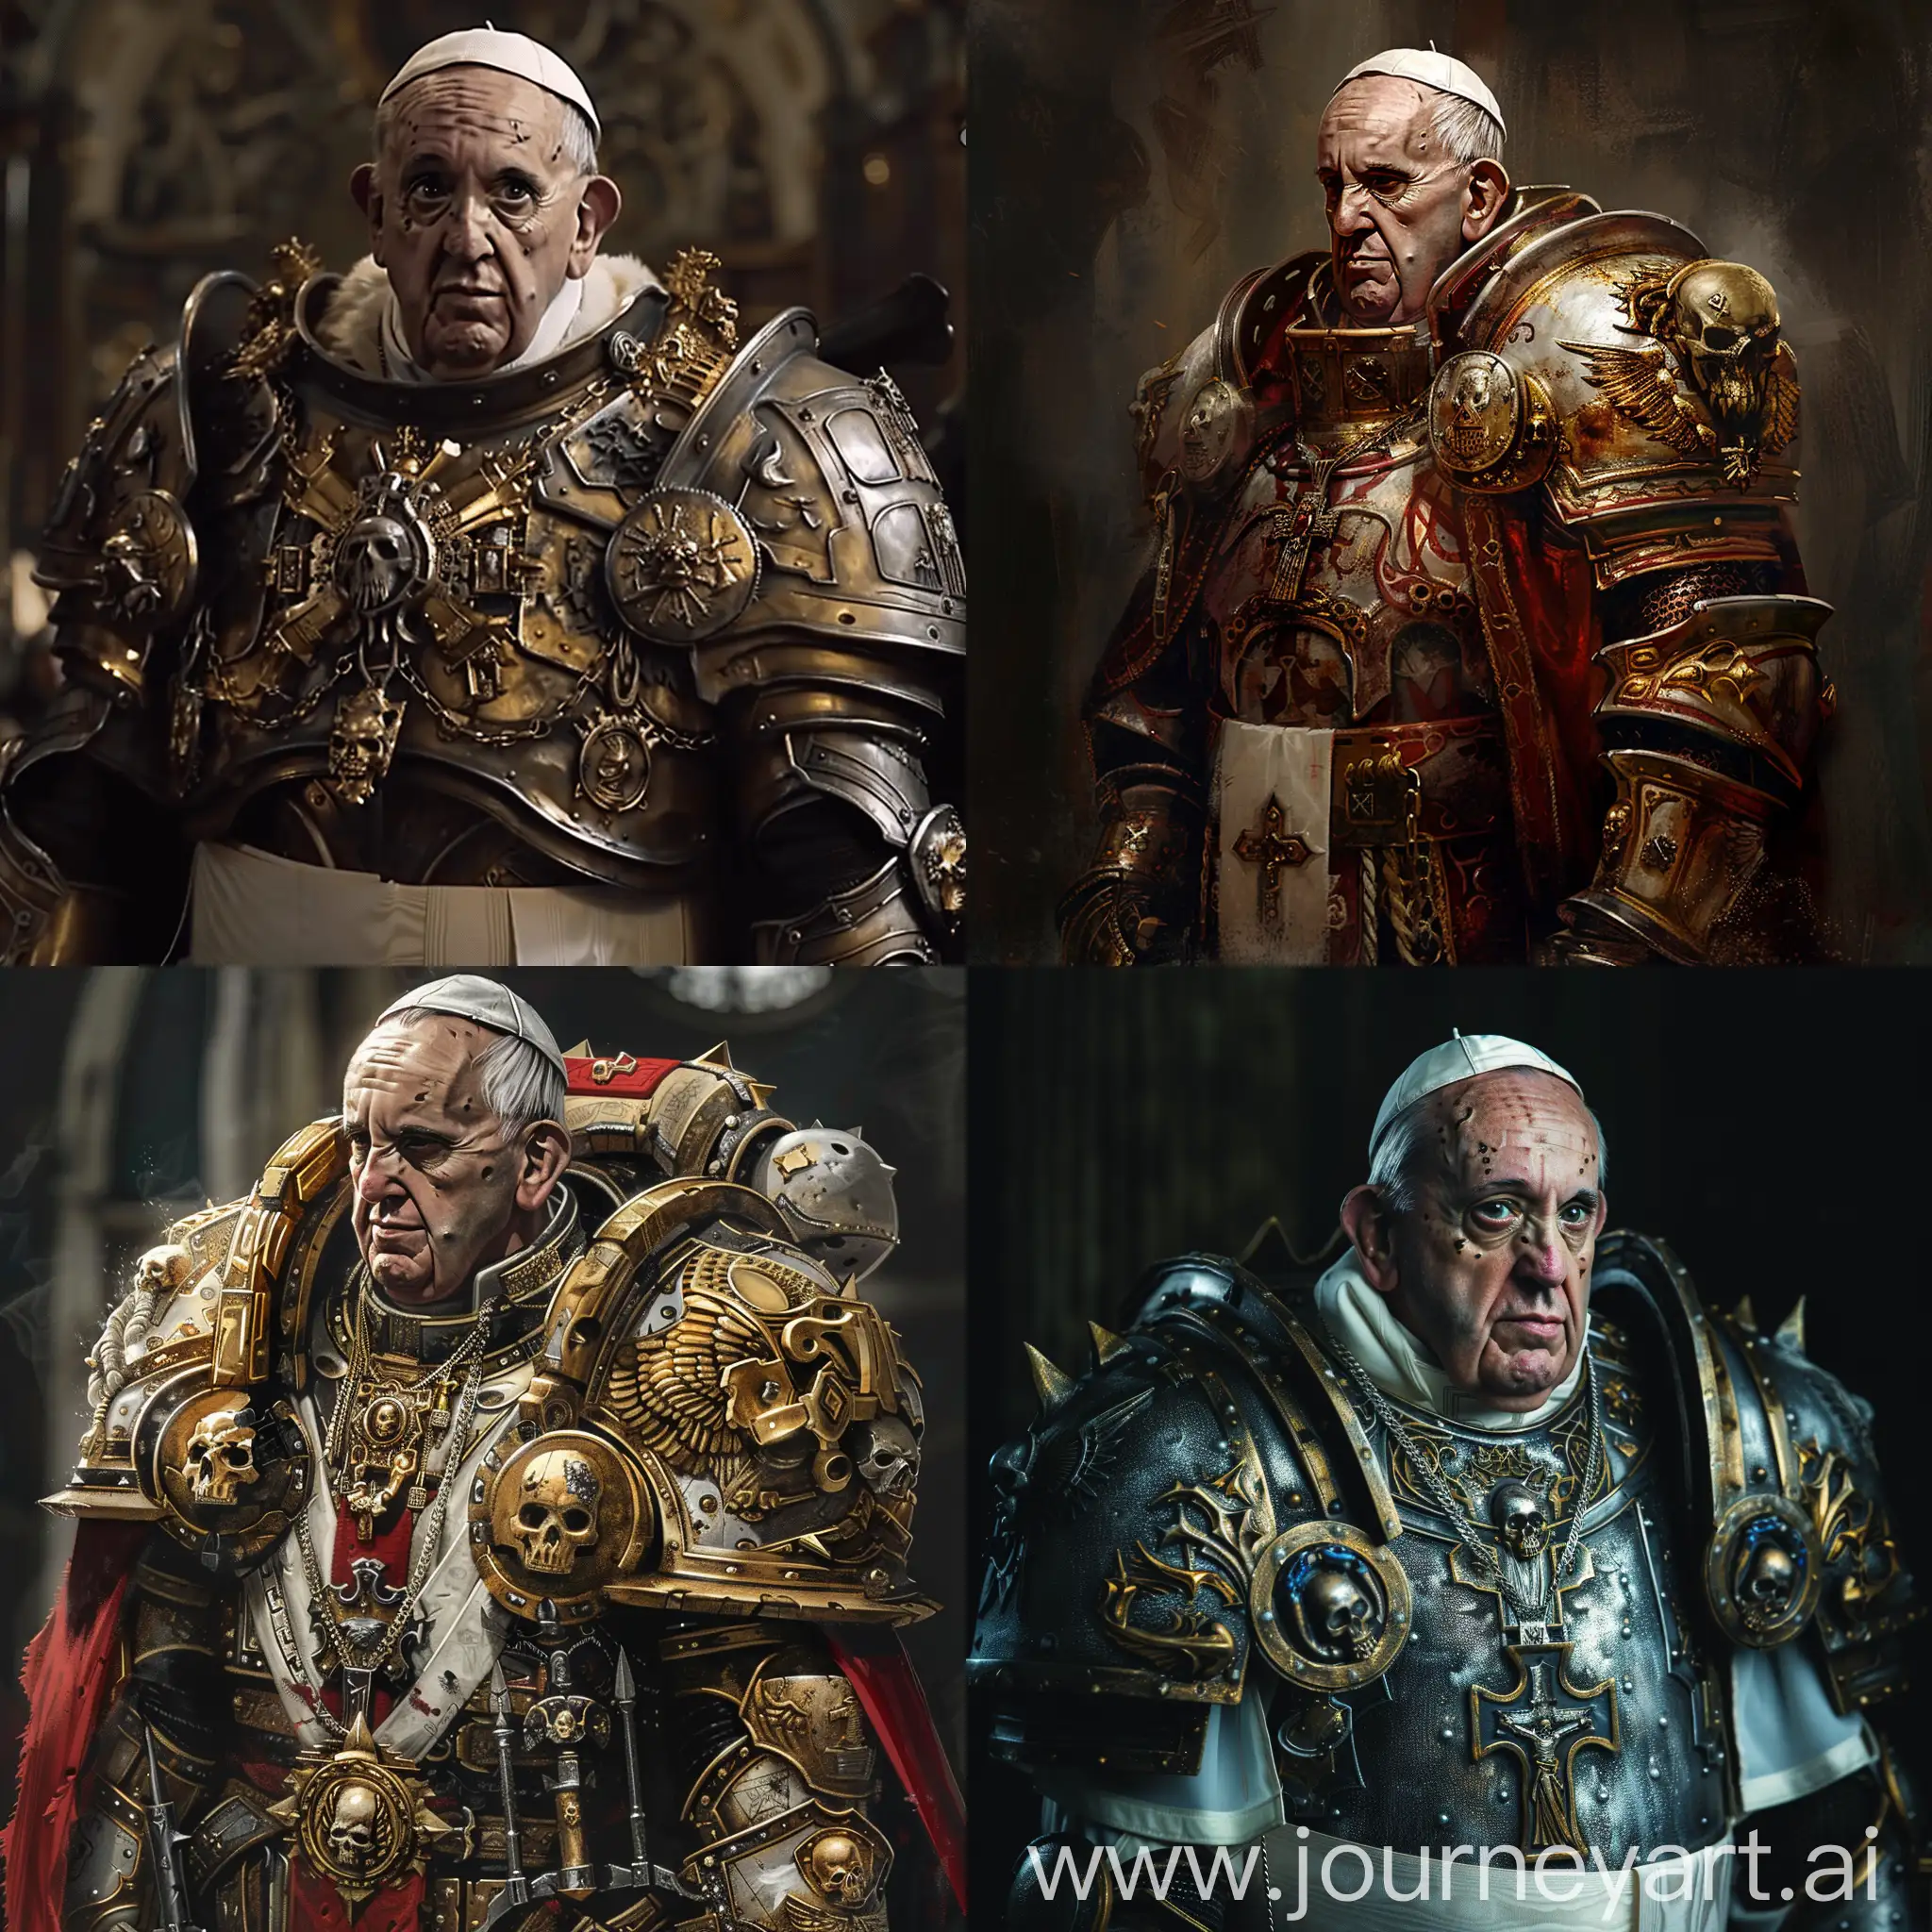 Pope-Francis-in-Warhammer-Armor-Holy-Leader-Embracing-Fantasy